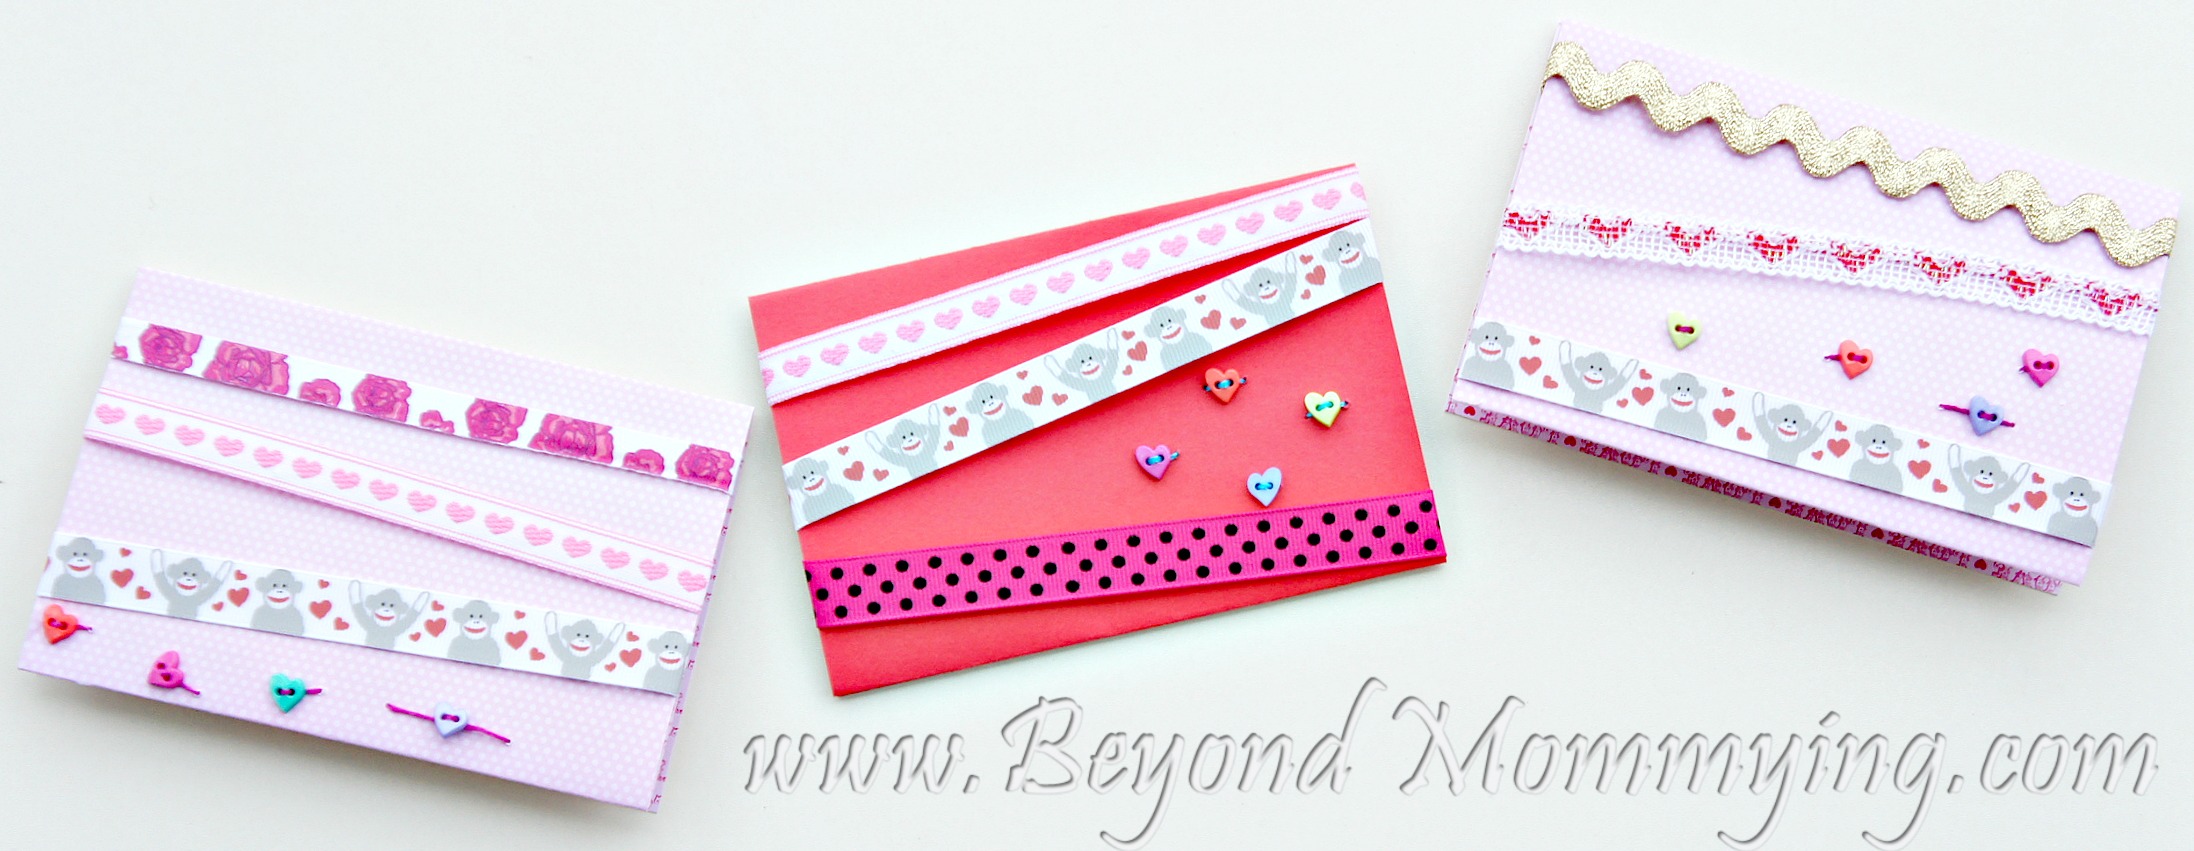 ribbon and button valentine's cards